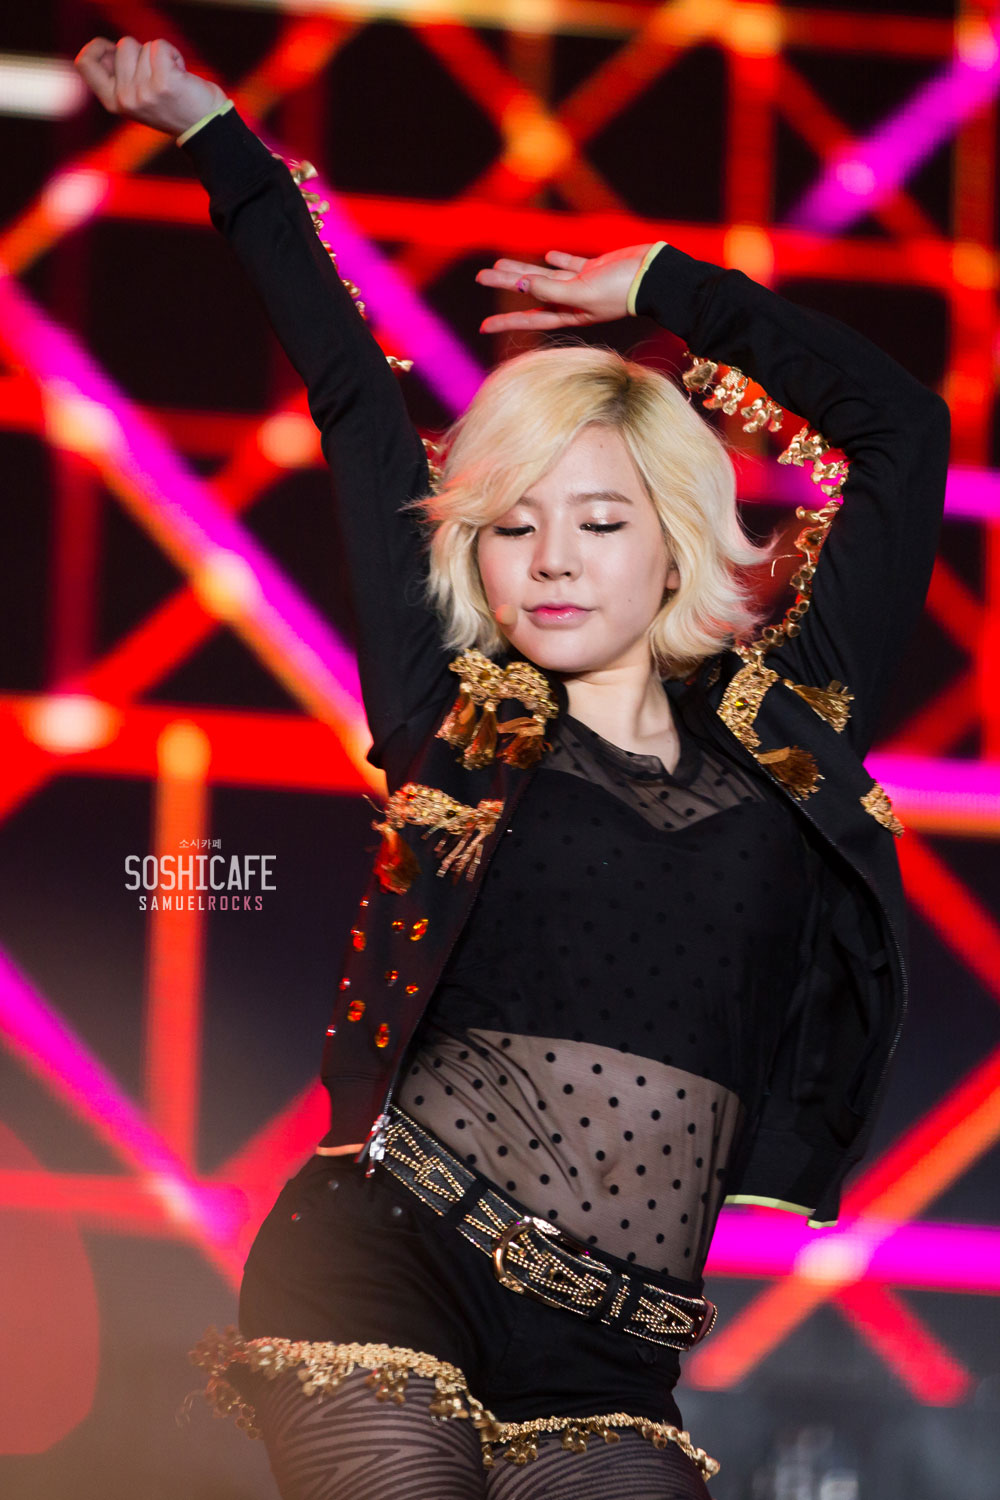 Sunny @ Super Joint Concert in Thailand